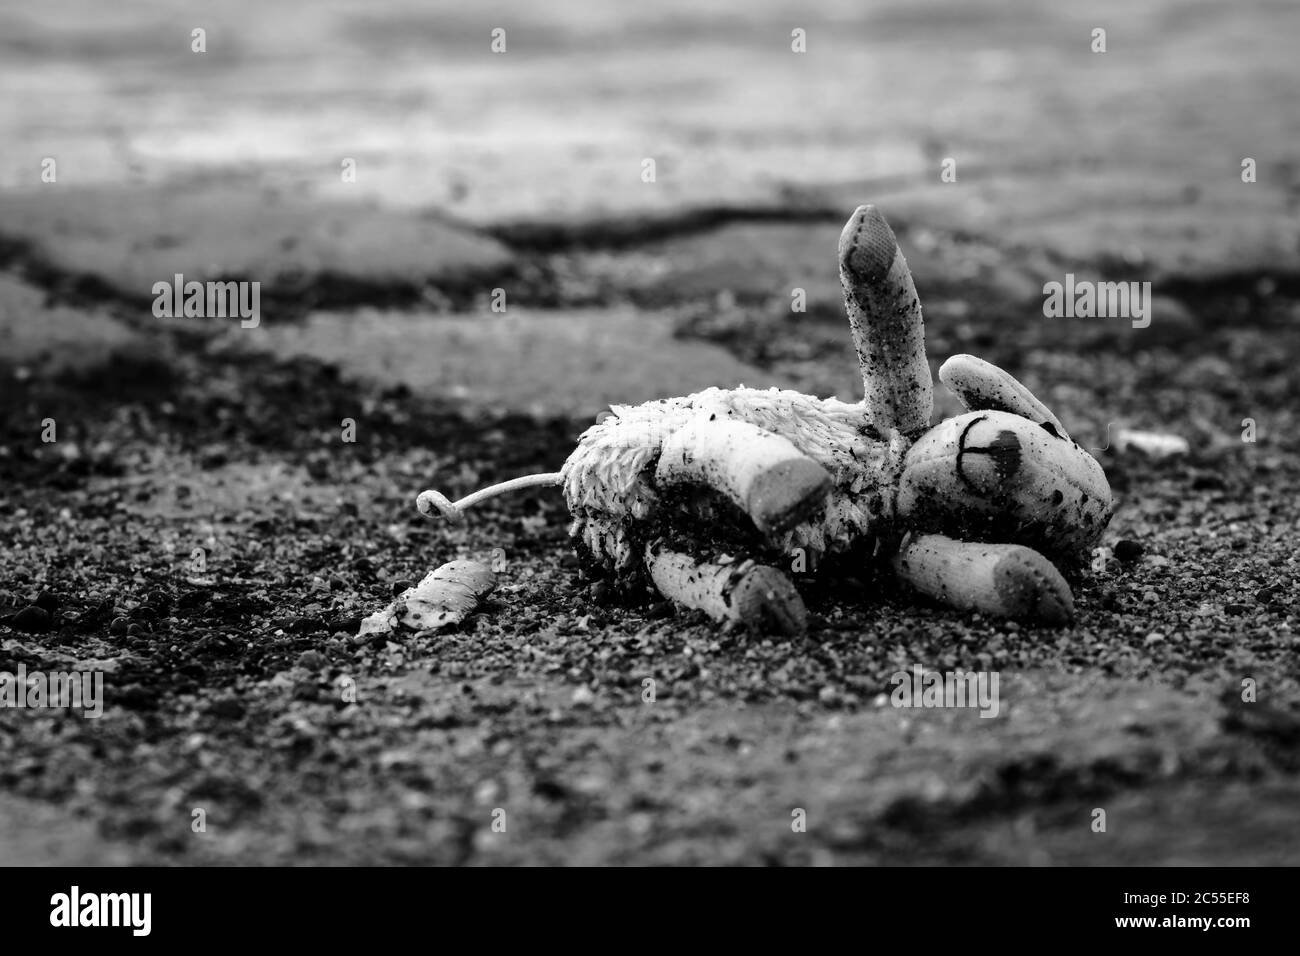 Lost stuffed animal sheep on the streets in black and white Stock Photo